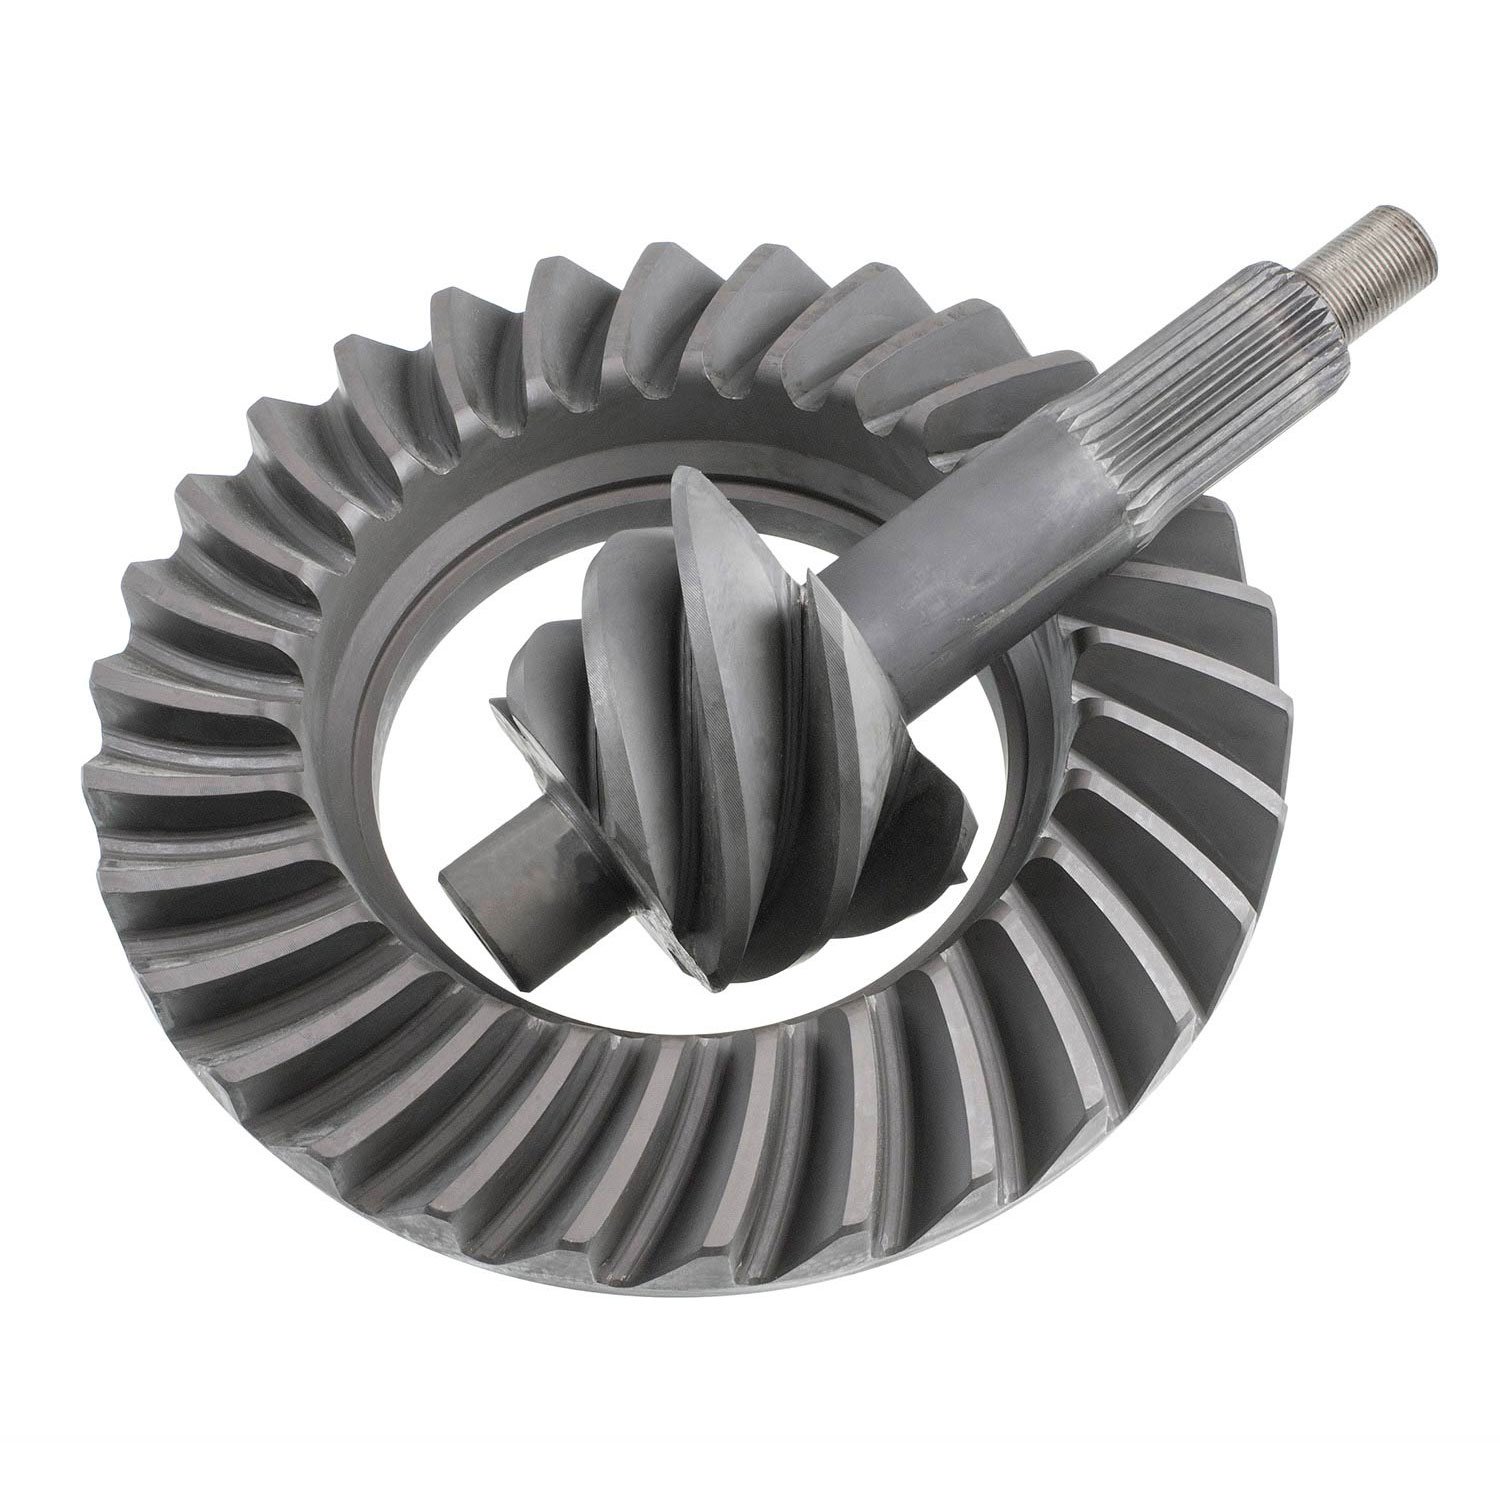 Ford 9.25" Pro Ring and Pinion Set Ratio: 5.00